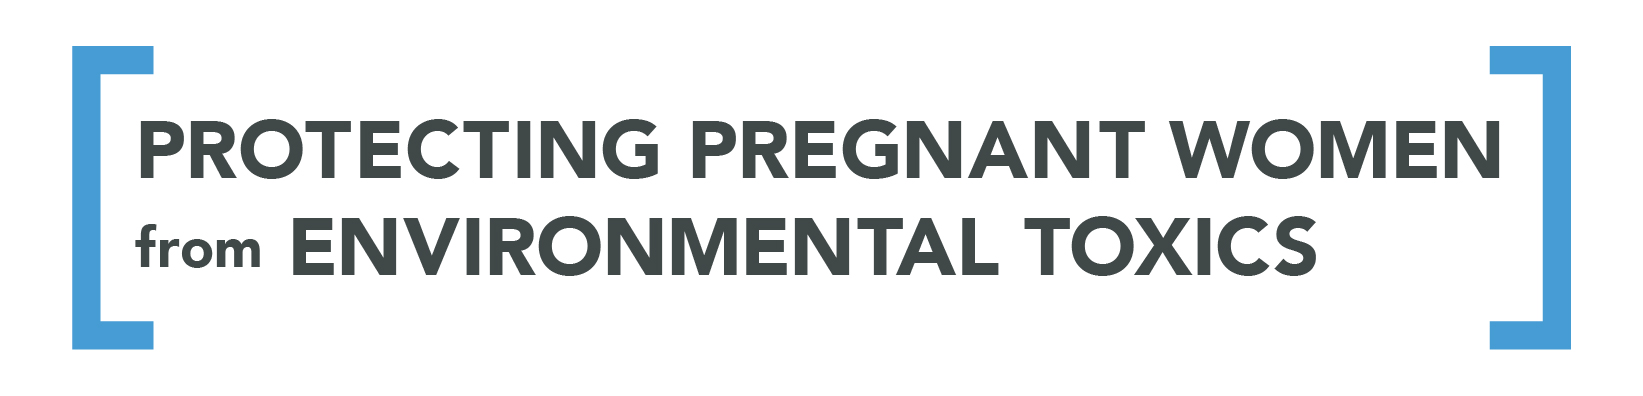 Protecting Pregnant Women from Environmental Toxics